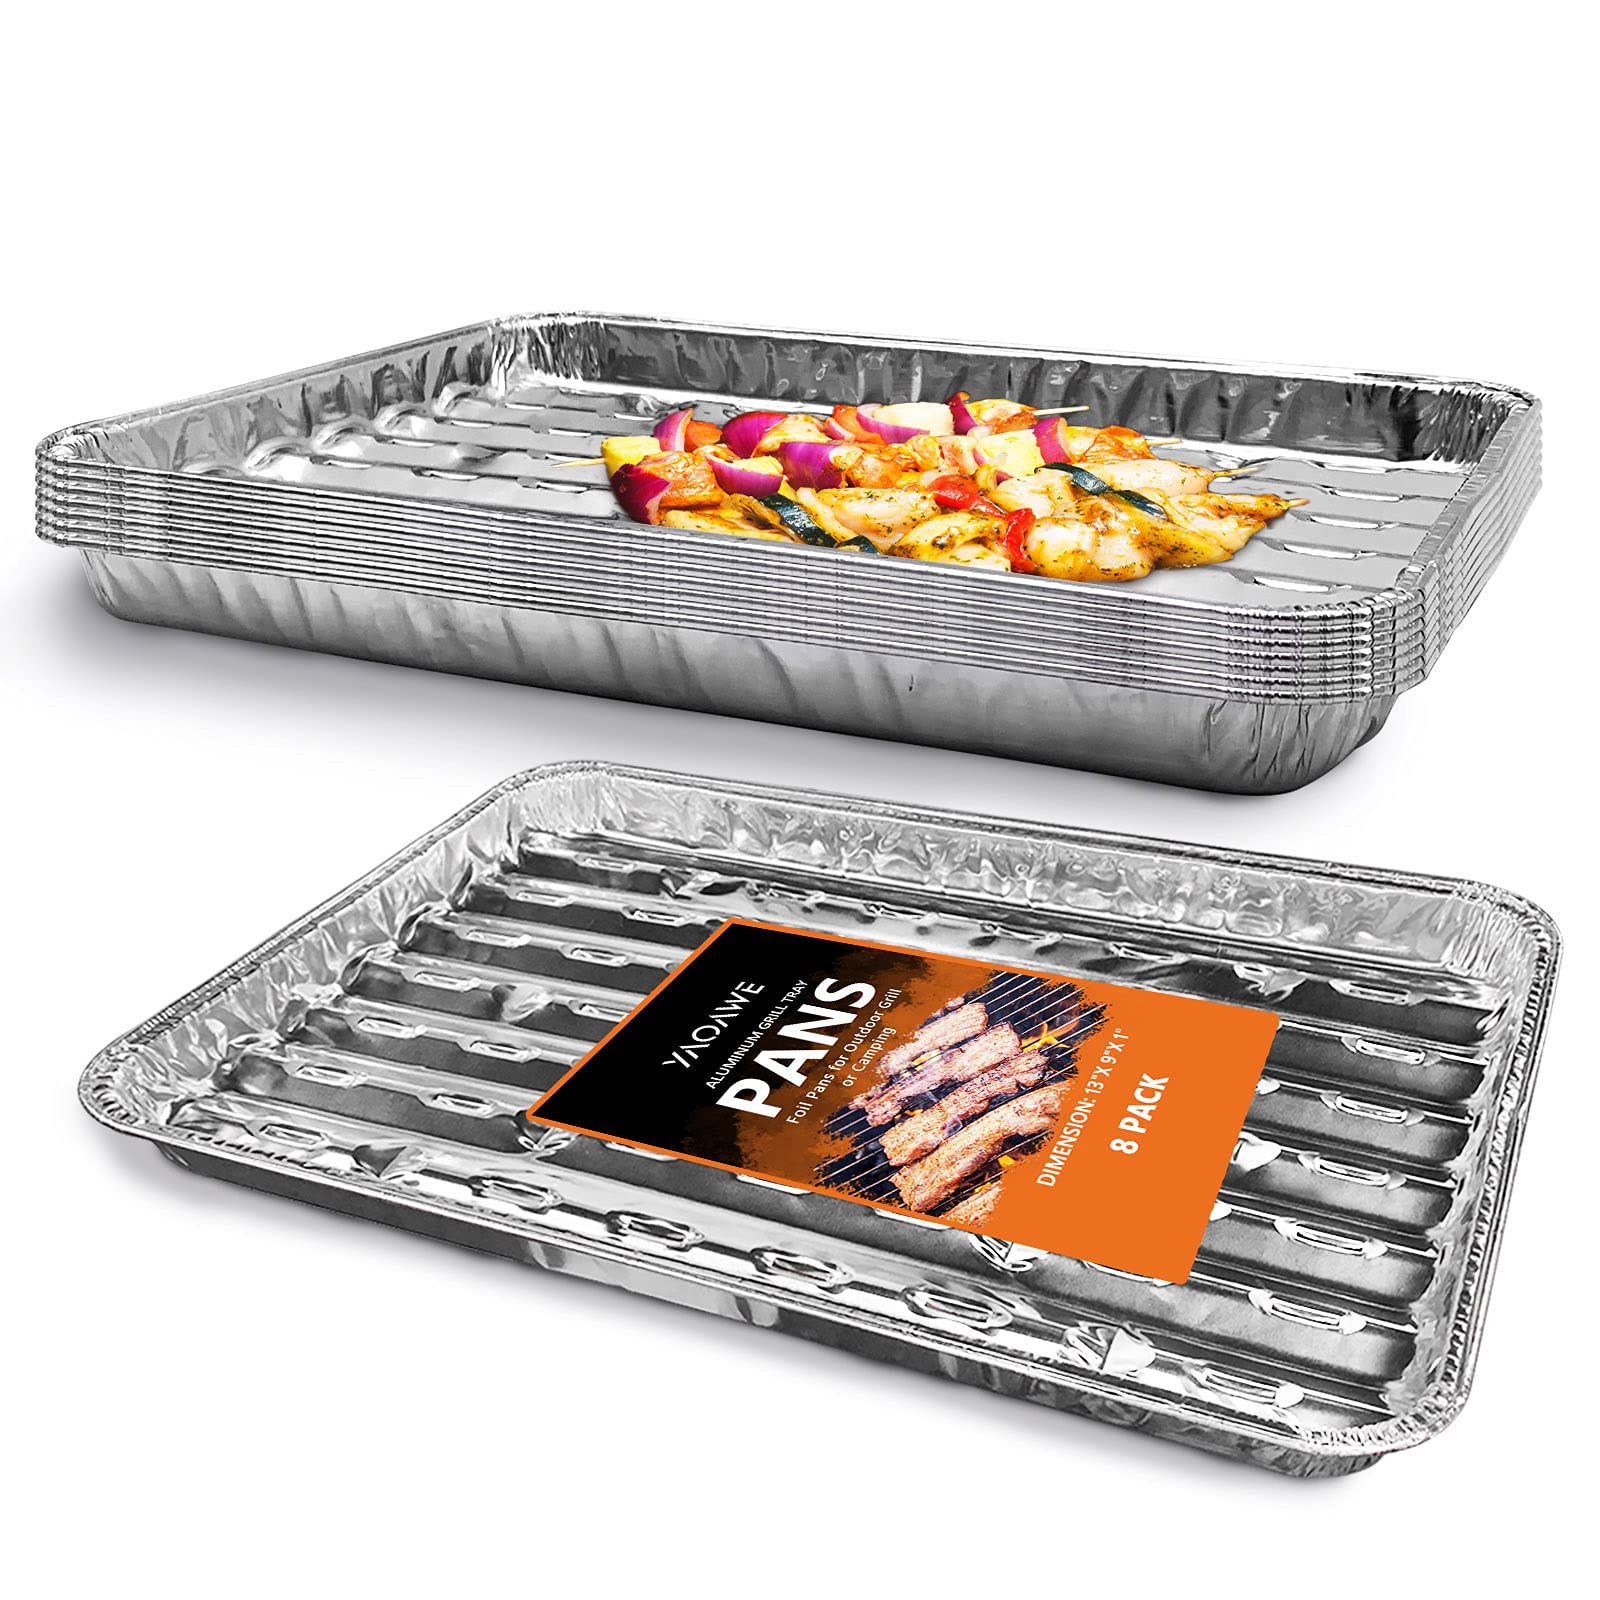 Aluminum Foil Broiler Pan (10 Pack) - Durable BBQ Grill Trays - 13X9 Inch